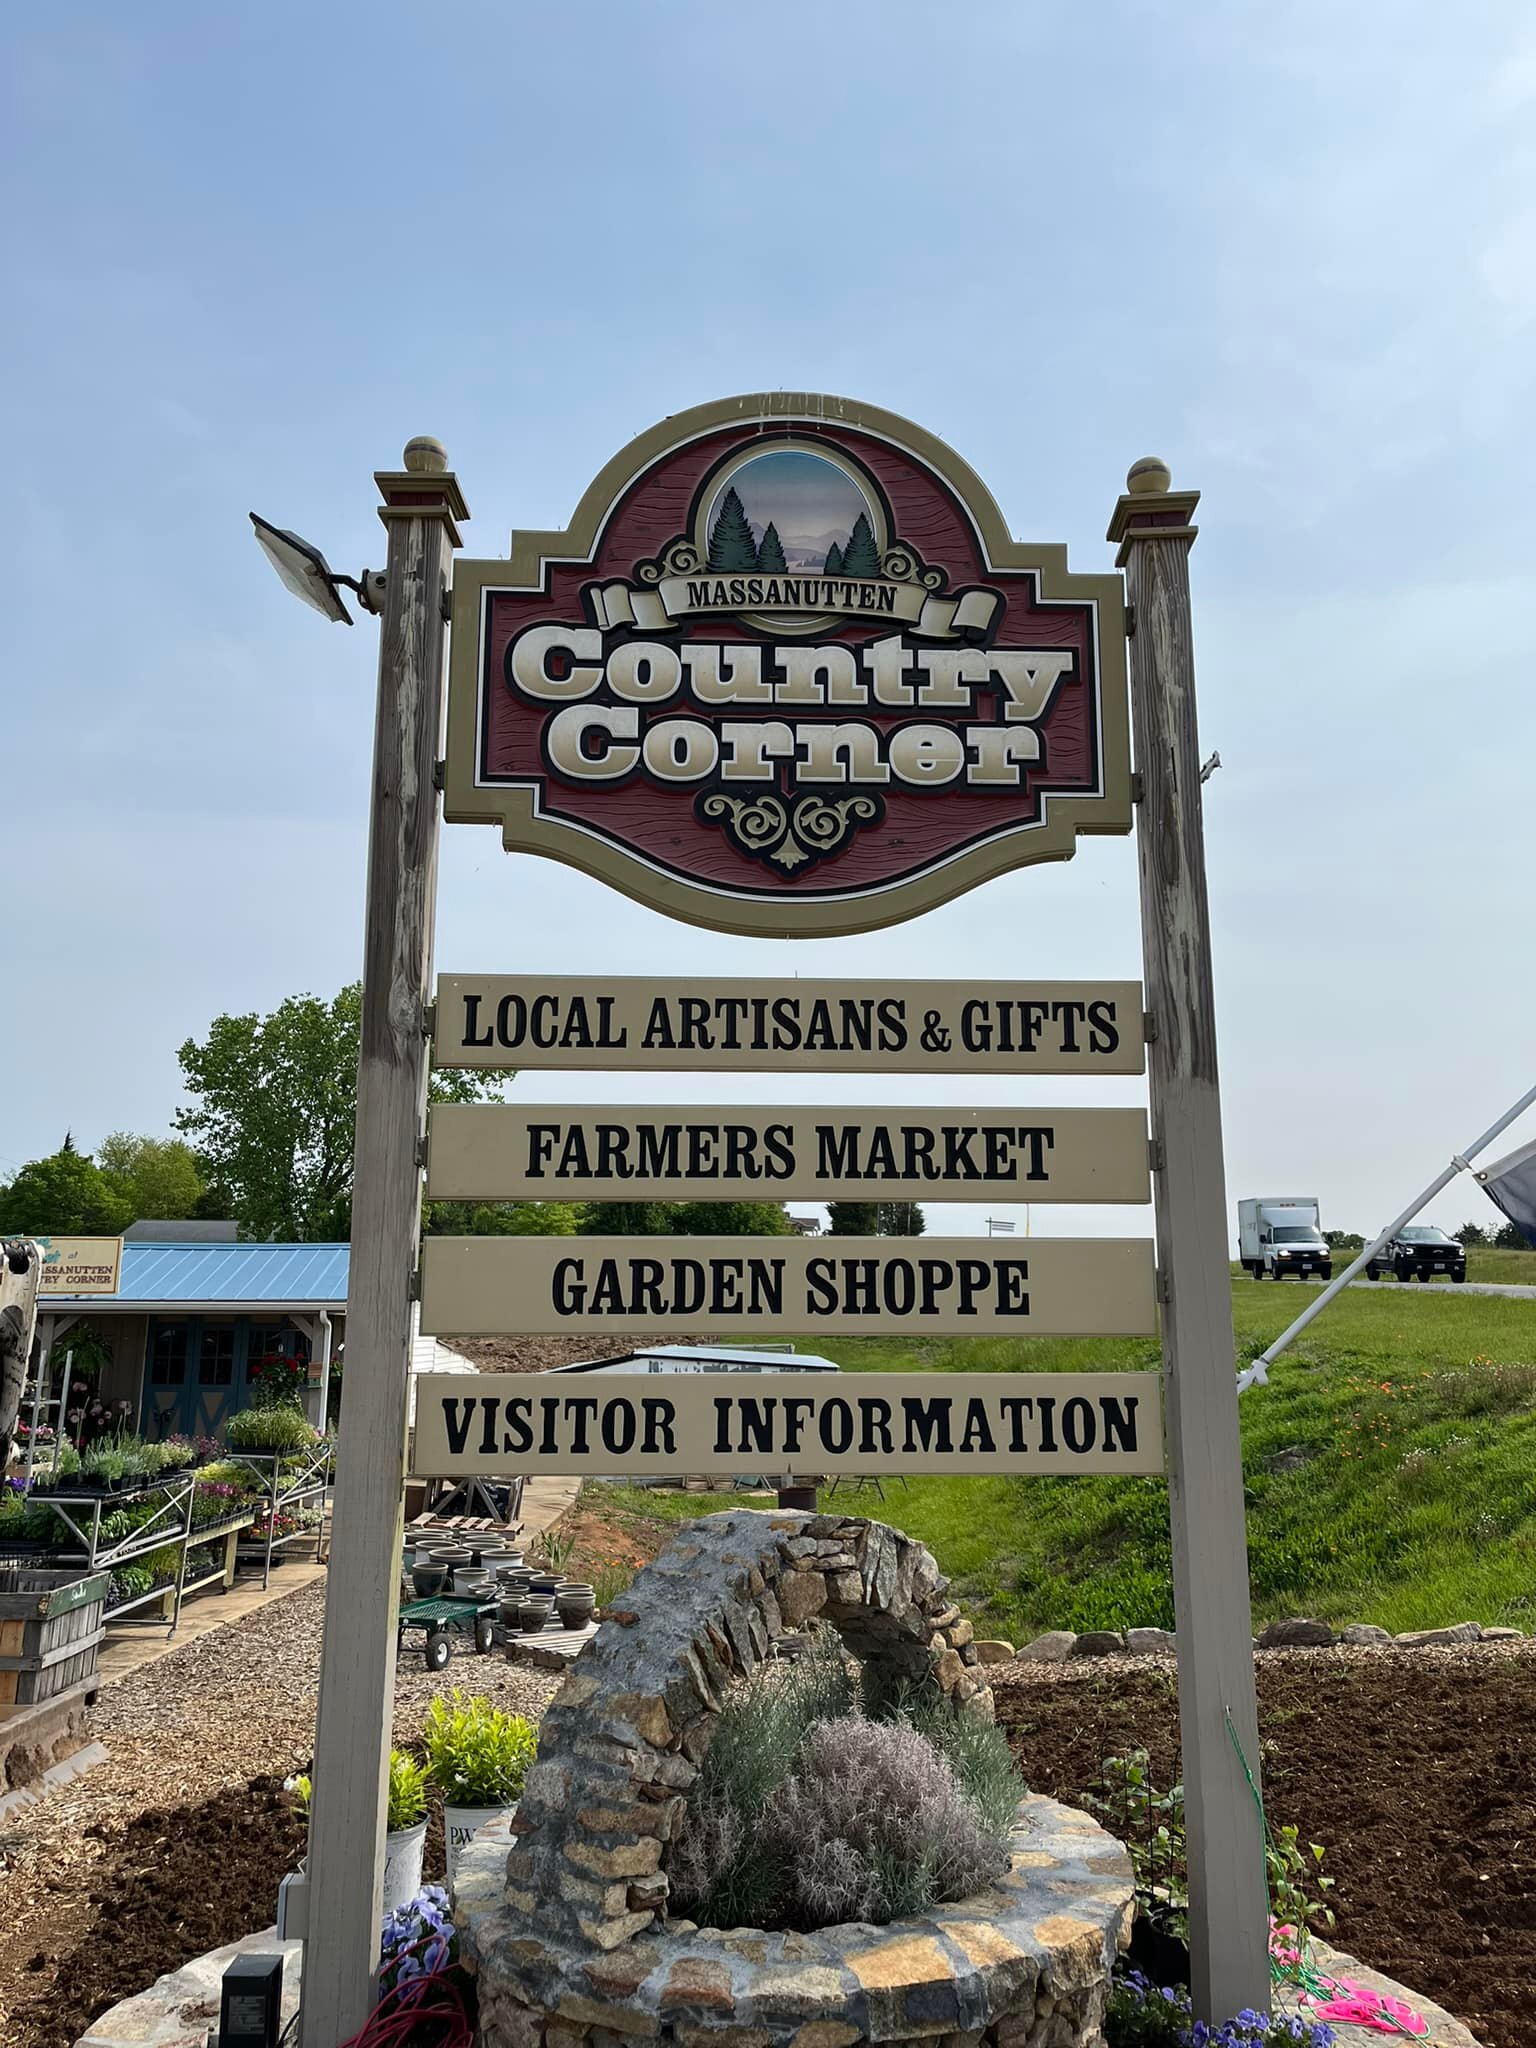 🌱Just in time for Mothers Day!🌱

We are excited to announce our new partnership  with Massanutten Country Corner‼️They now stock our Virginia native plants, including habitat packs‼️